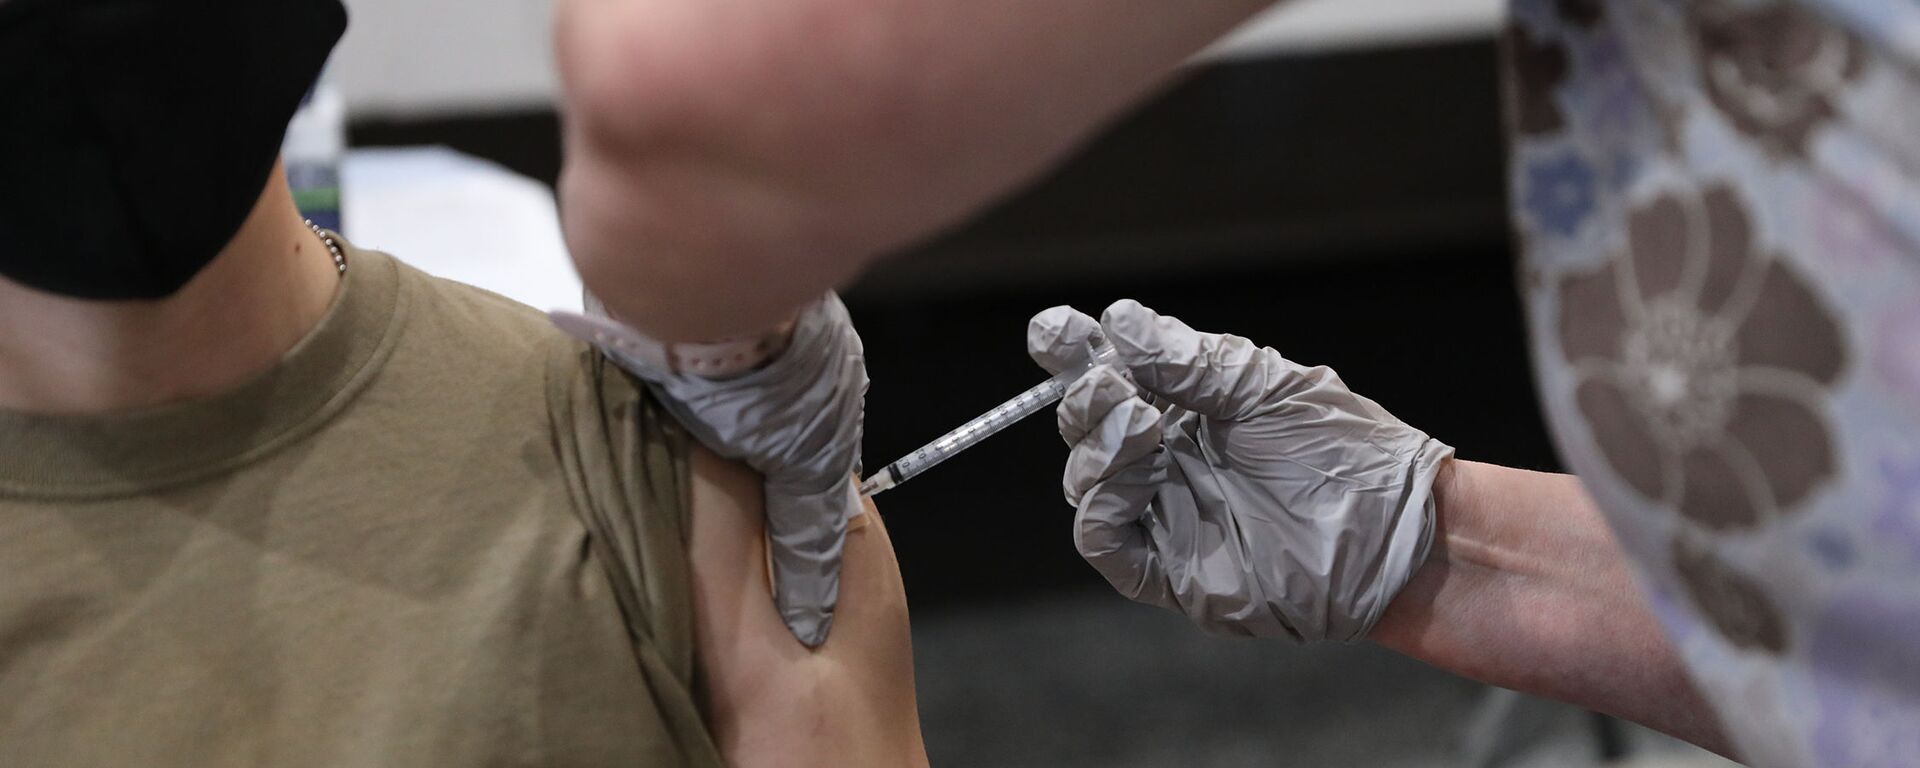 U.S. Army Sgt. Brandy Herrmann, assigned to the 24th Theater Public Affairs Support Element, receives the COVID-19 vaccination at Stayton Theater, at Fort Bliss, Texas, Feb. 5, 2021. Herrmann was instructed to wait 15 minutes before driving or participate in vigorous physical activity after receiving the shot. (U.S. Army photo by Pfc. Maxwell Bass, 24th Theater Public Affairs Support Element) - Sputnik International, 1920, 15.09.2021